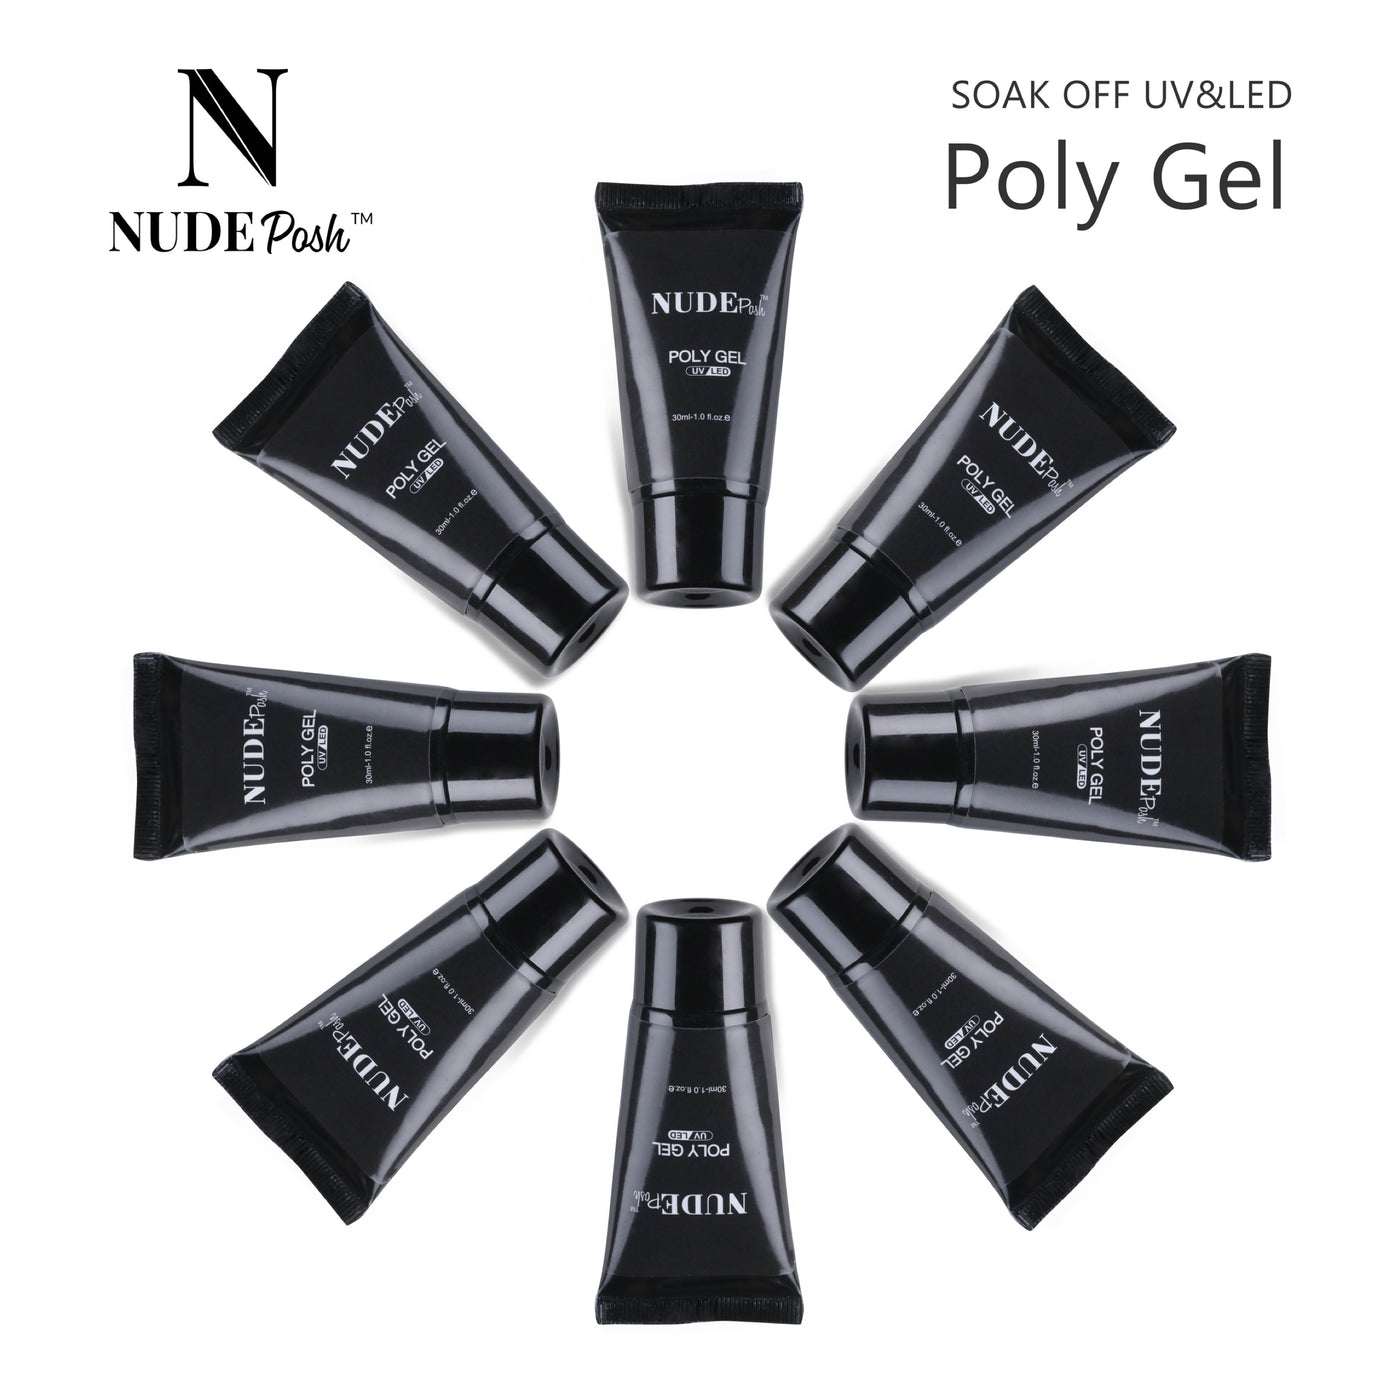 Poly Gel Set Full Line 20 Colors Collection